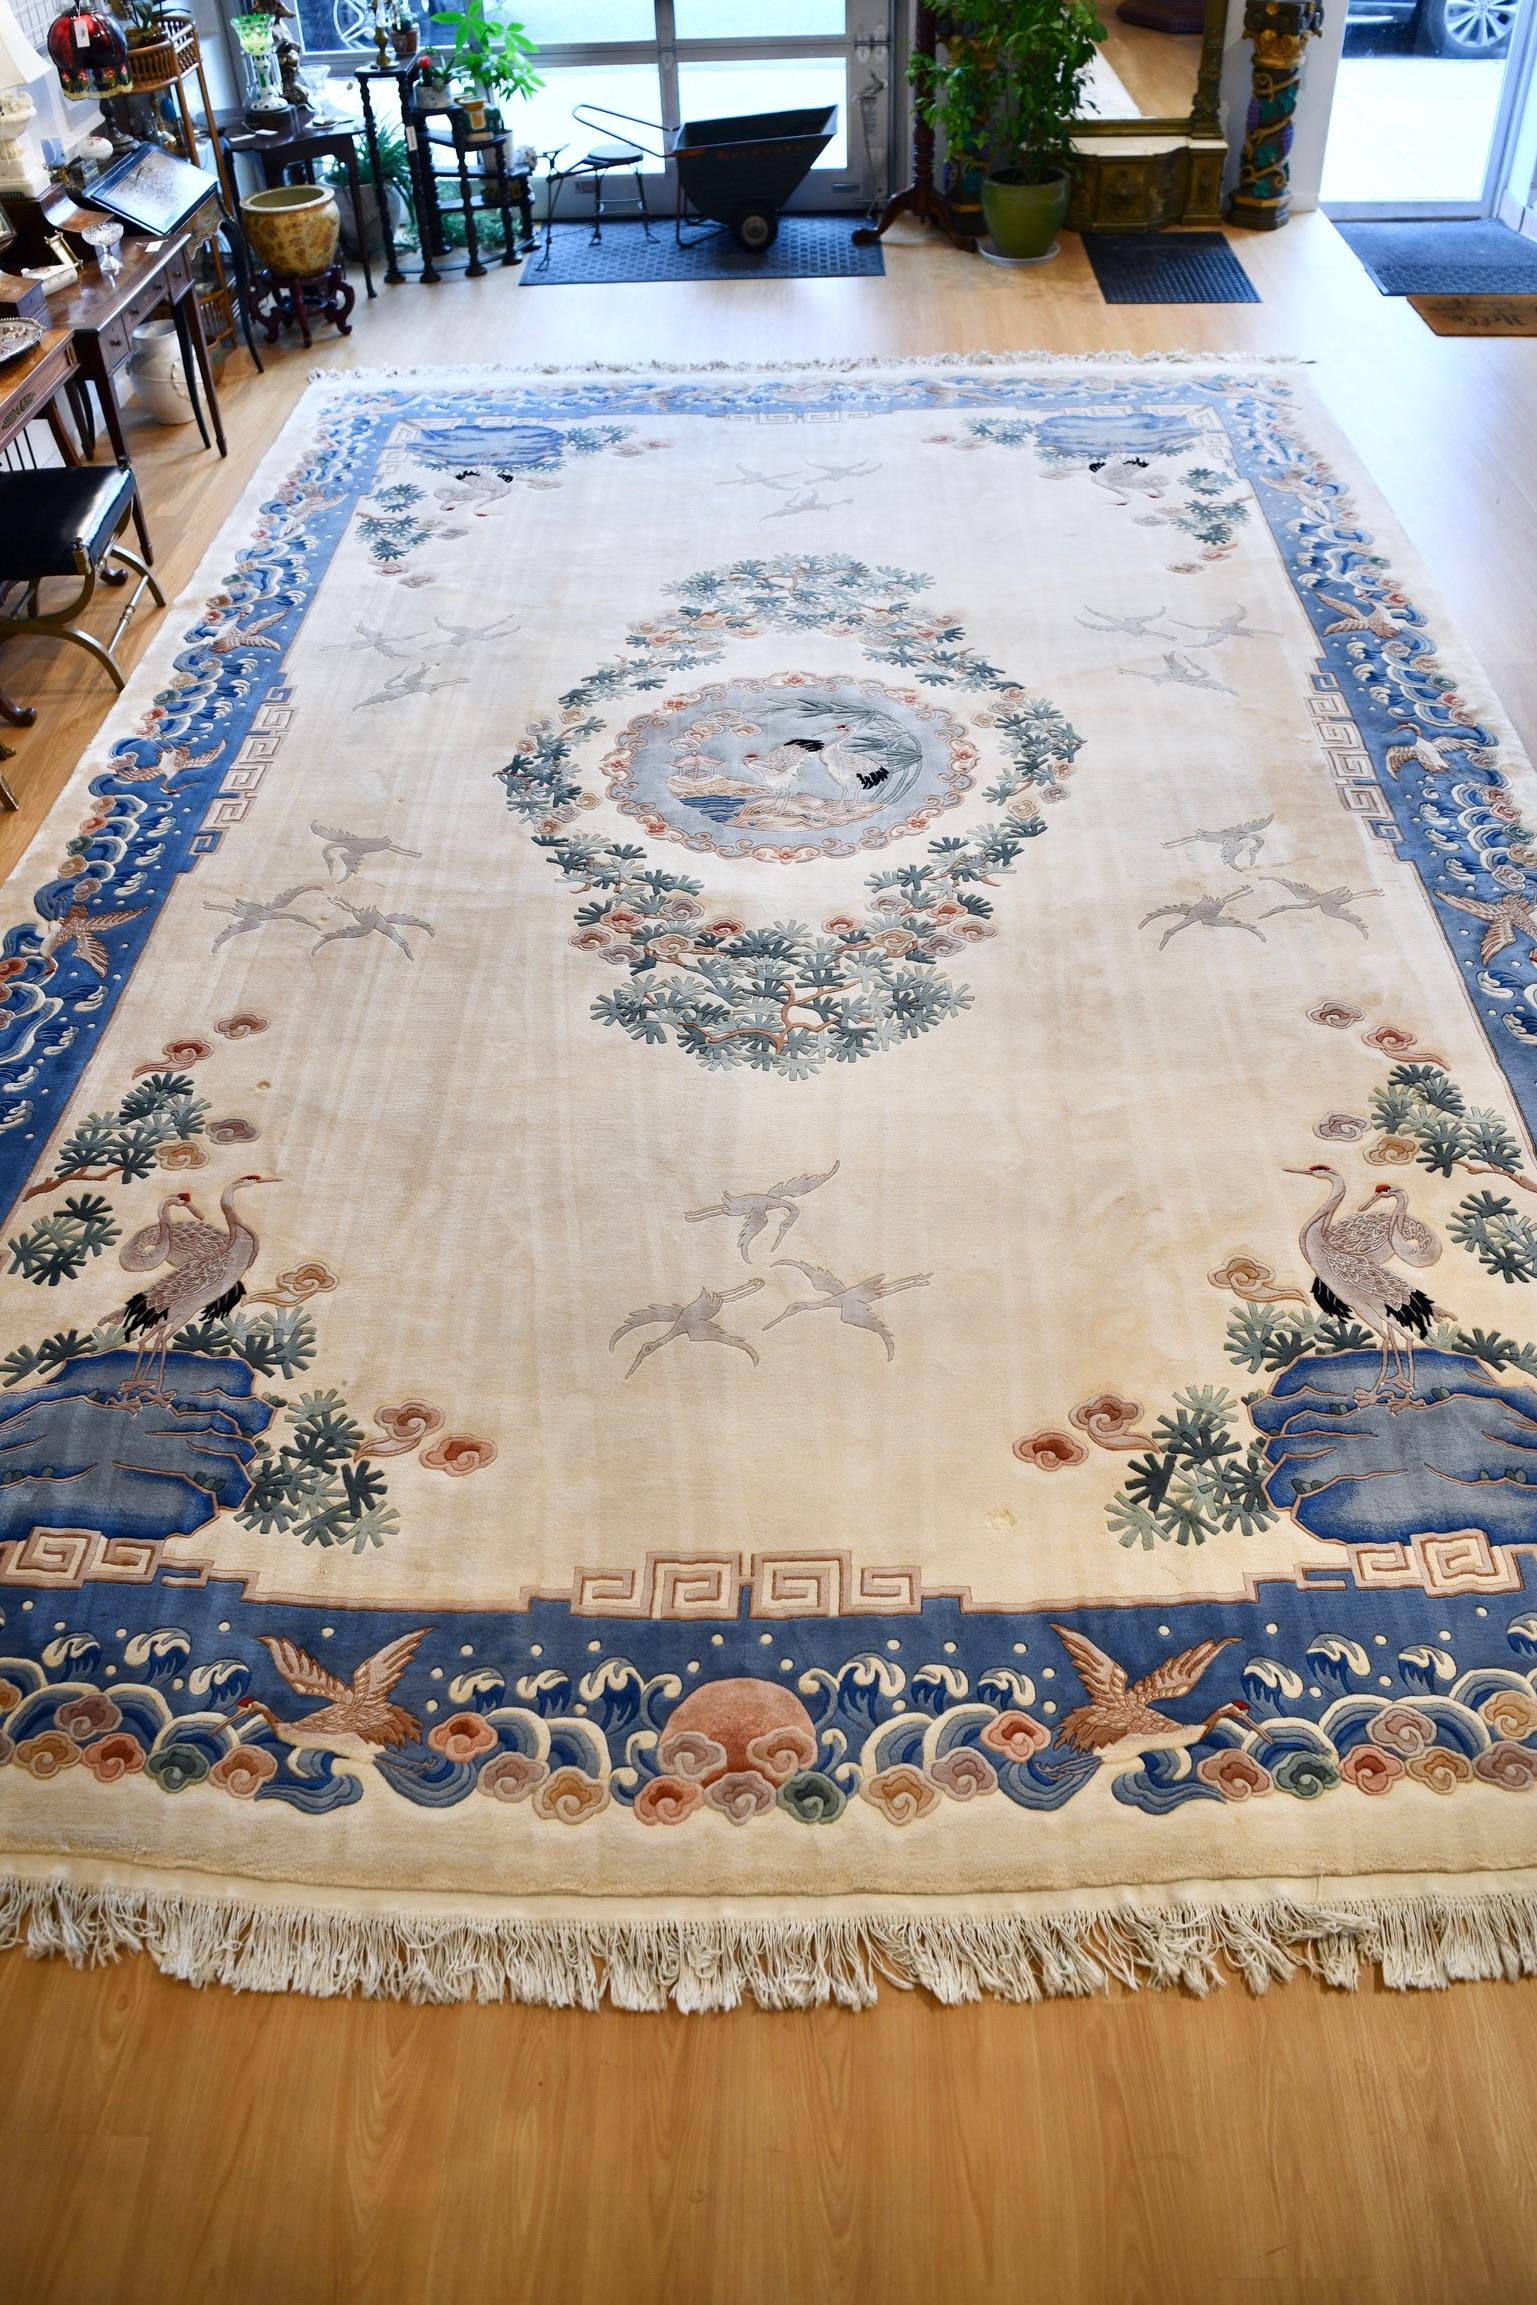 Vintage palatial size Chinese rug with florals, cranes and nature design. In excellent vintage condition with minor wear. Dimensions: 18' x 12'.